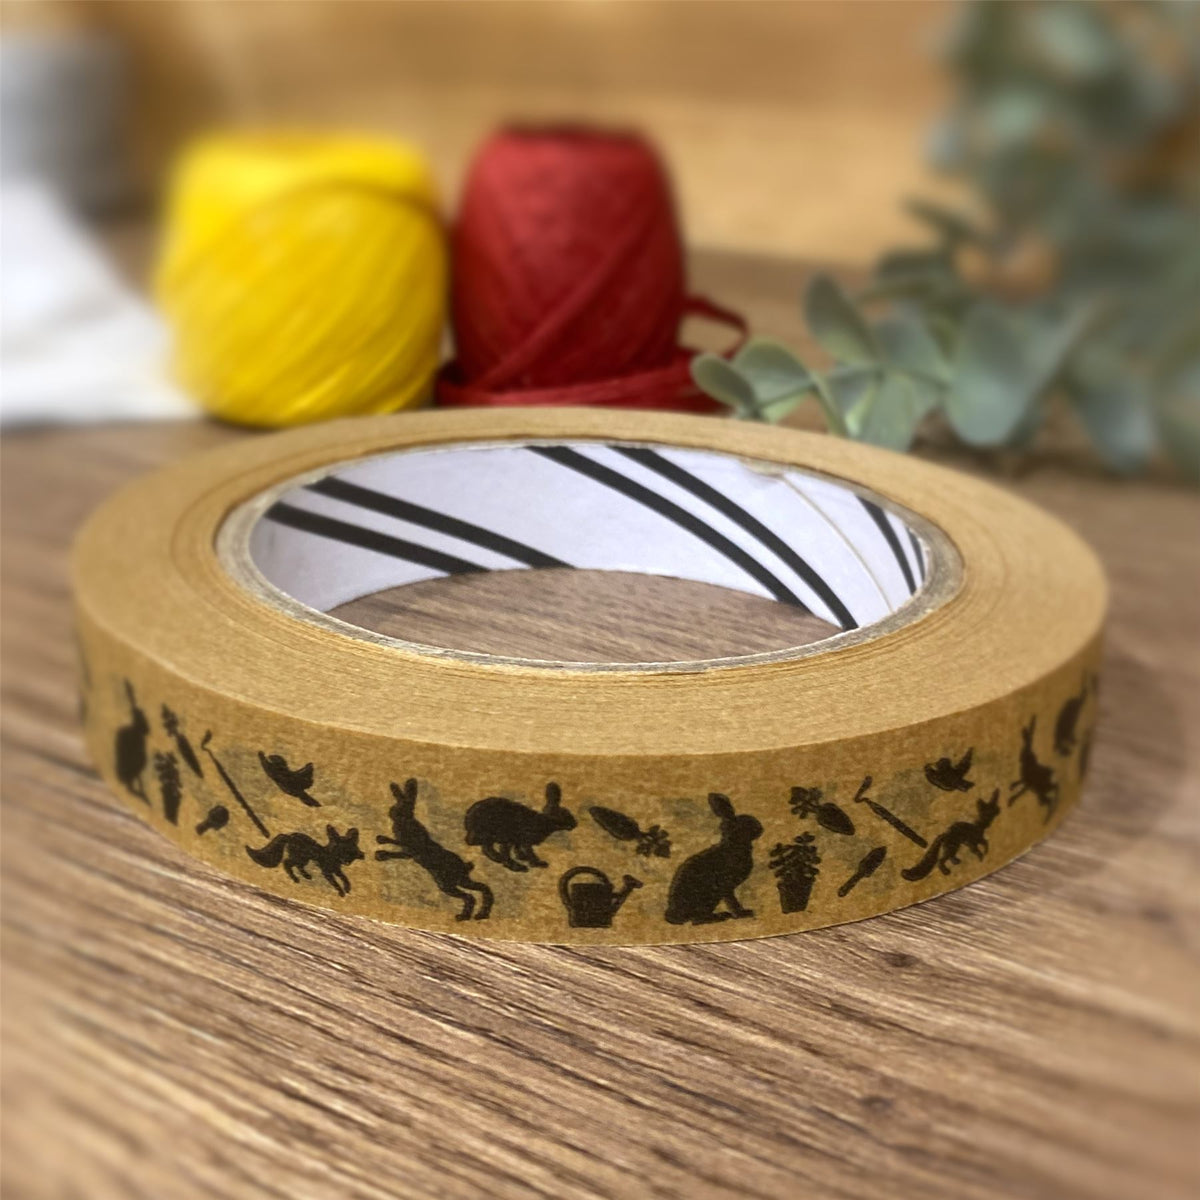 peter-rabbit-brown-kraft-paper-tape-50m-eco-friendly-wrapping|LLTAPEPR|Luck and Luck| 1